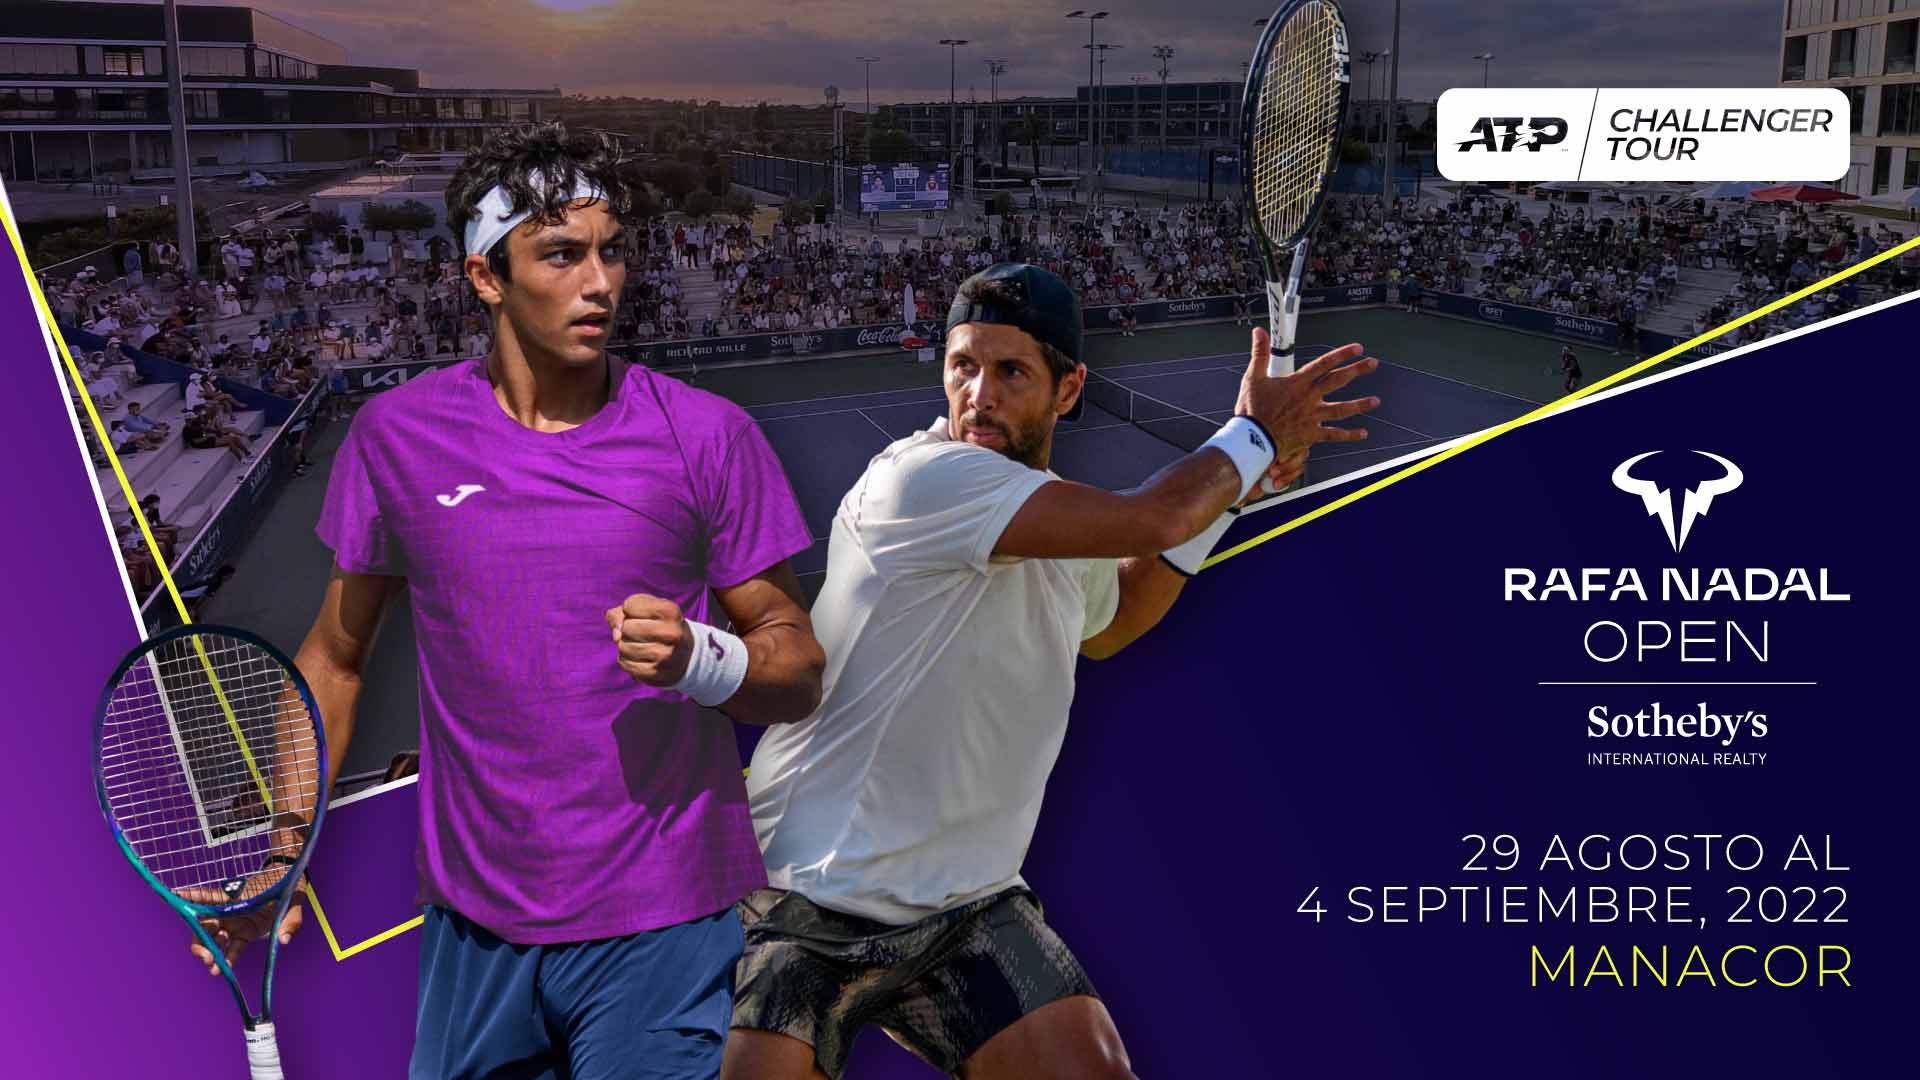 The Rafa Nadal Open by Sotheby’s International Realty returns to Manacor